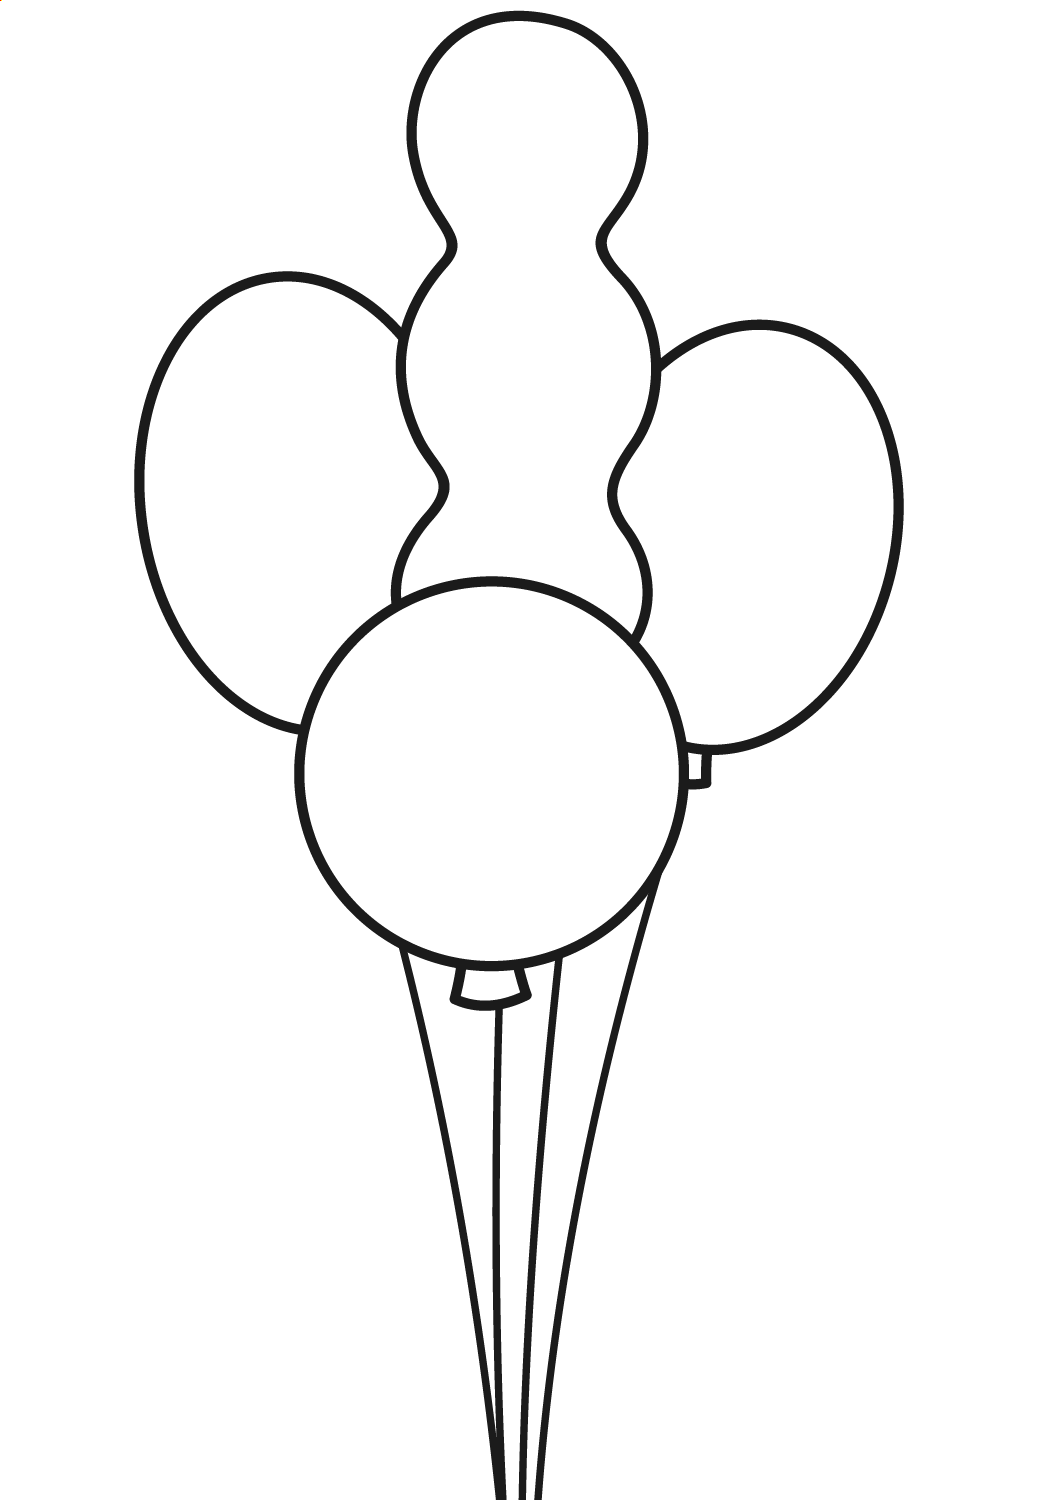 Four Balloons Coloring Page